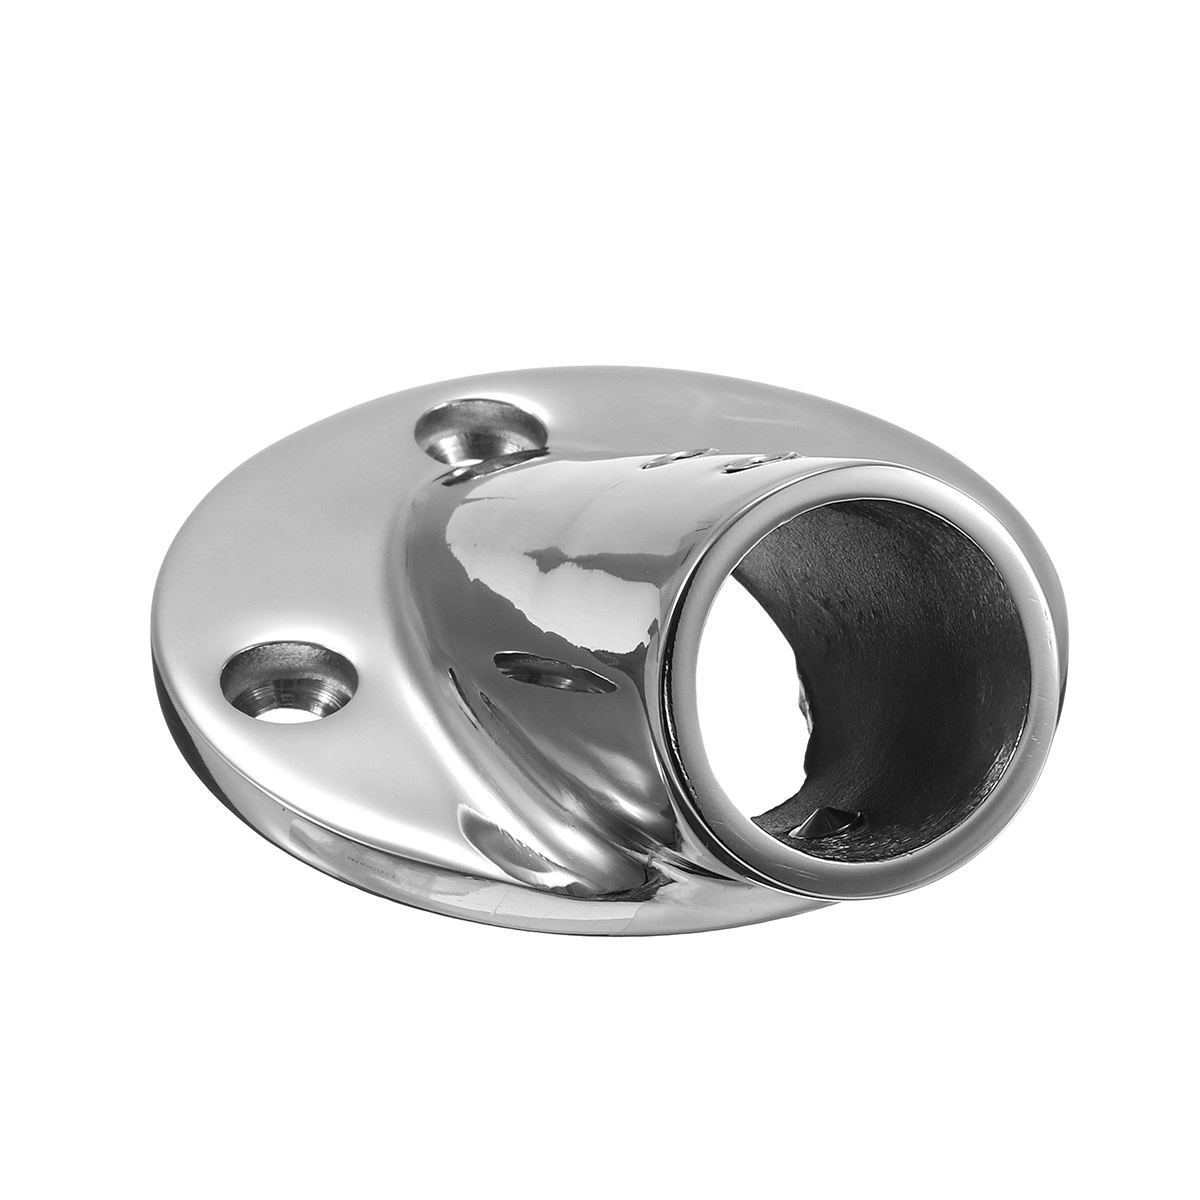 30° Railing Handrail Rails Pipes Fittings Base 316 Stainless Steel for Marine Boat